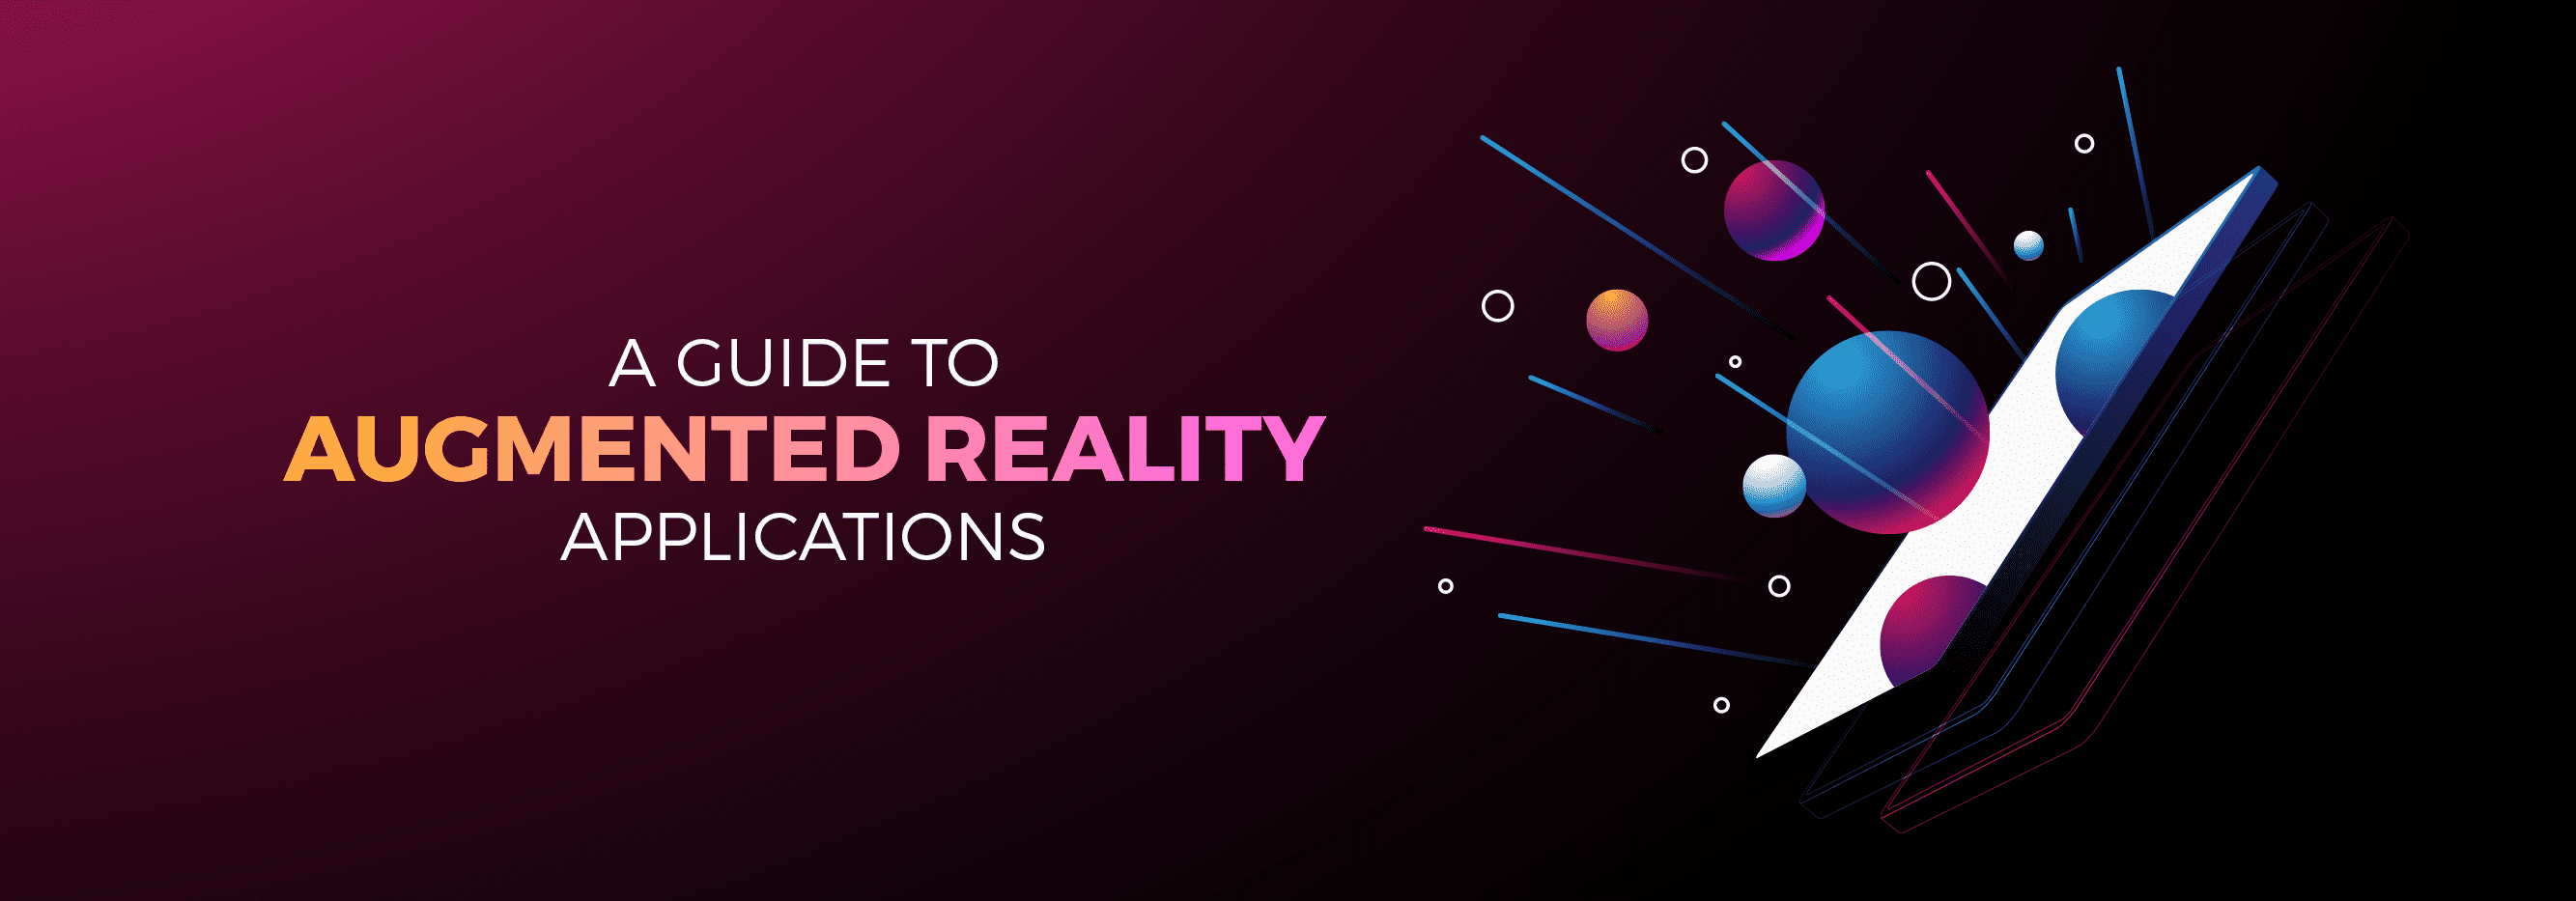 A Guide to Augmented Reality Applications_banner